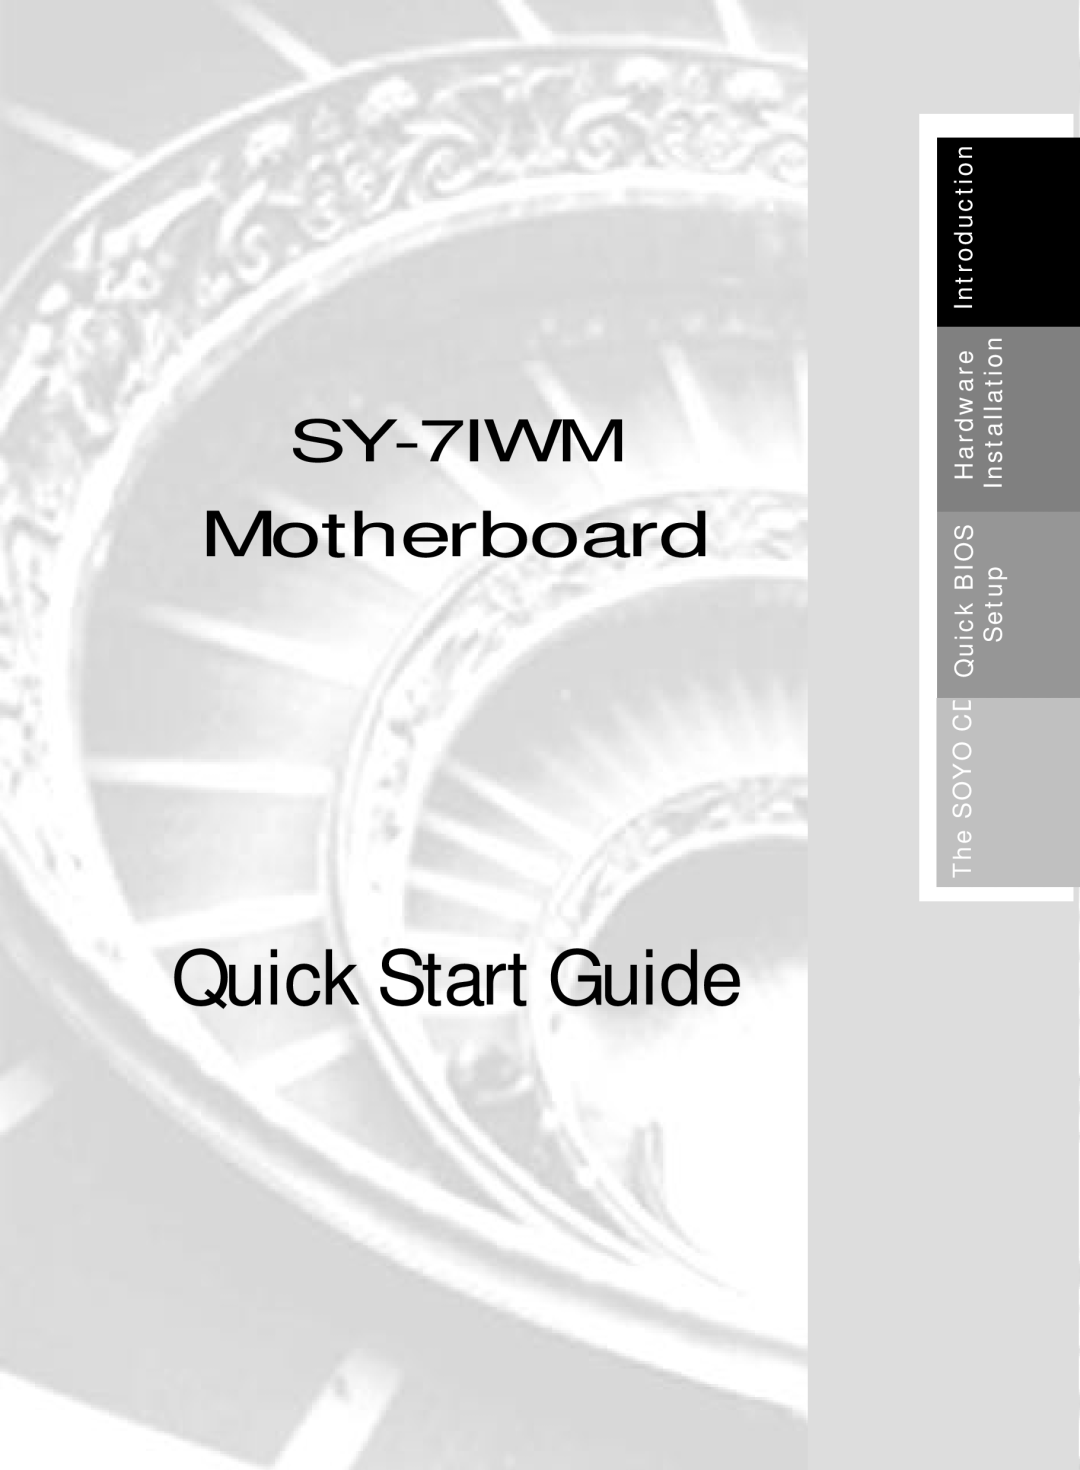 SOYO SY-7IWM quick start Introduction, Hardware, Installation, Quick BIOS, Setup, The SOYO CD, Quick Start Guide 